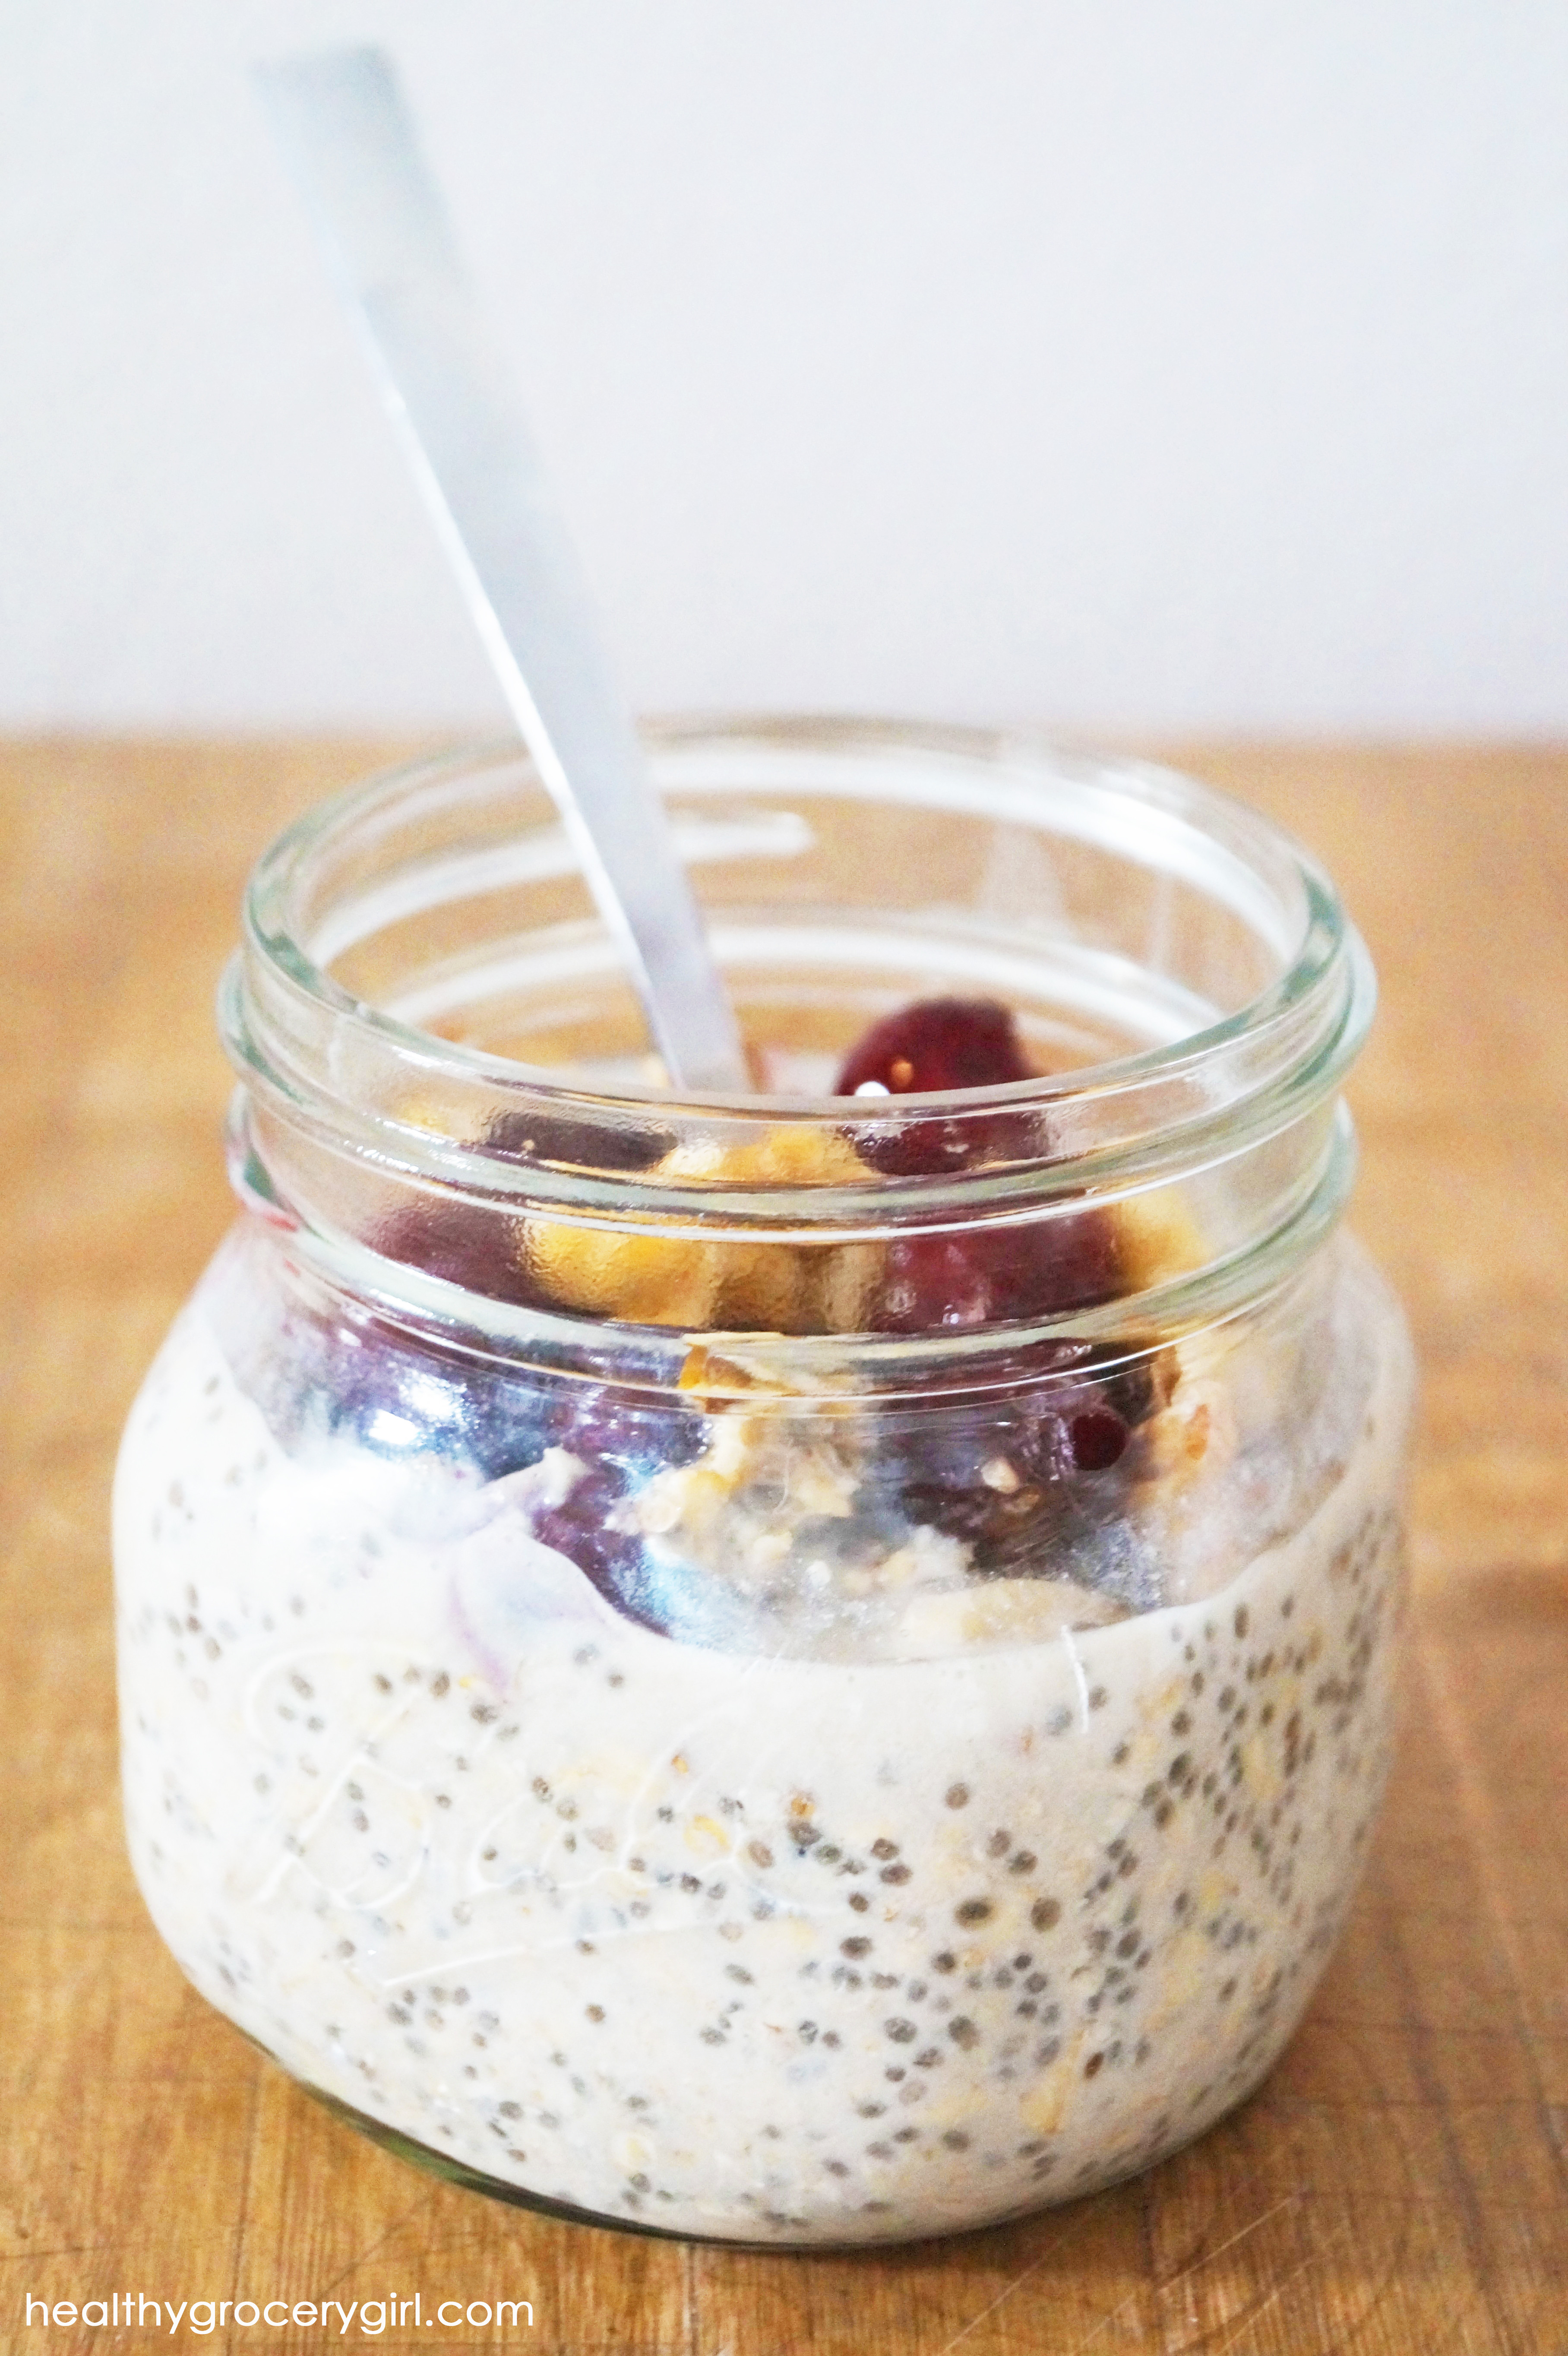 Overnight Oats Healthy
 Healthy Grocery Girl